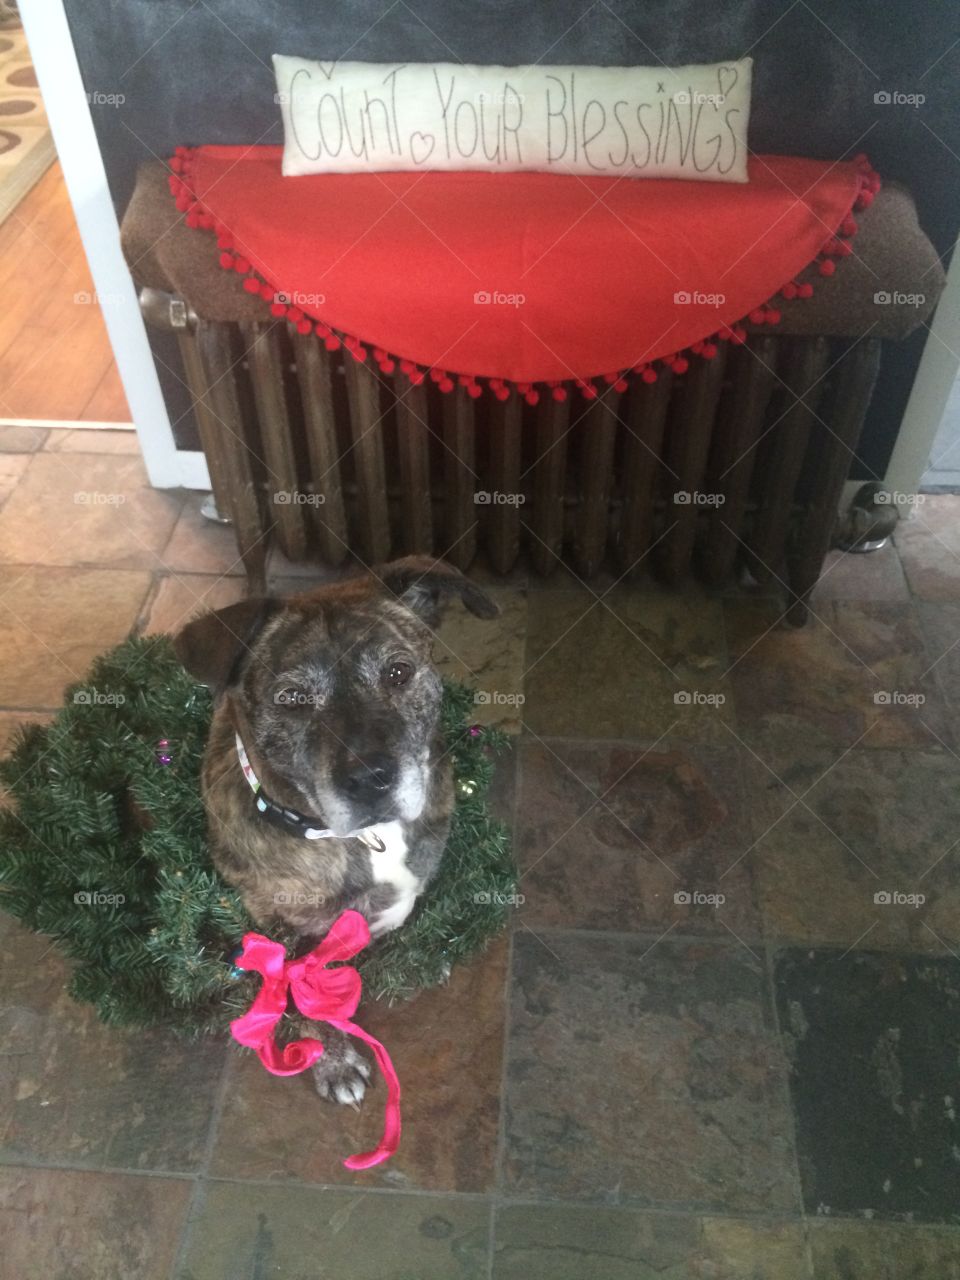 Merry Christmas from a dog in a wreath, count your blessings 